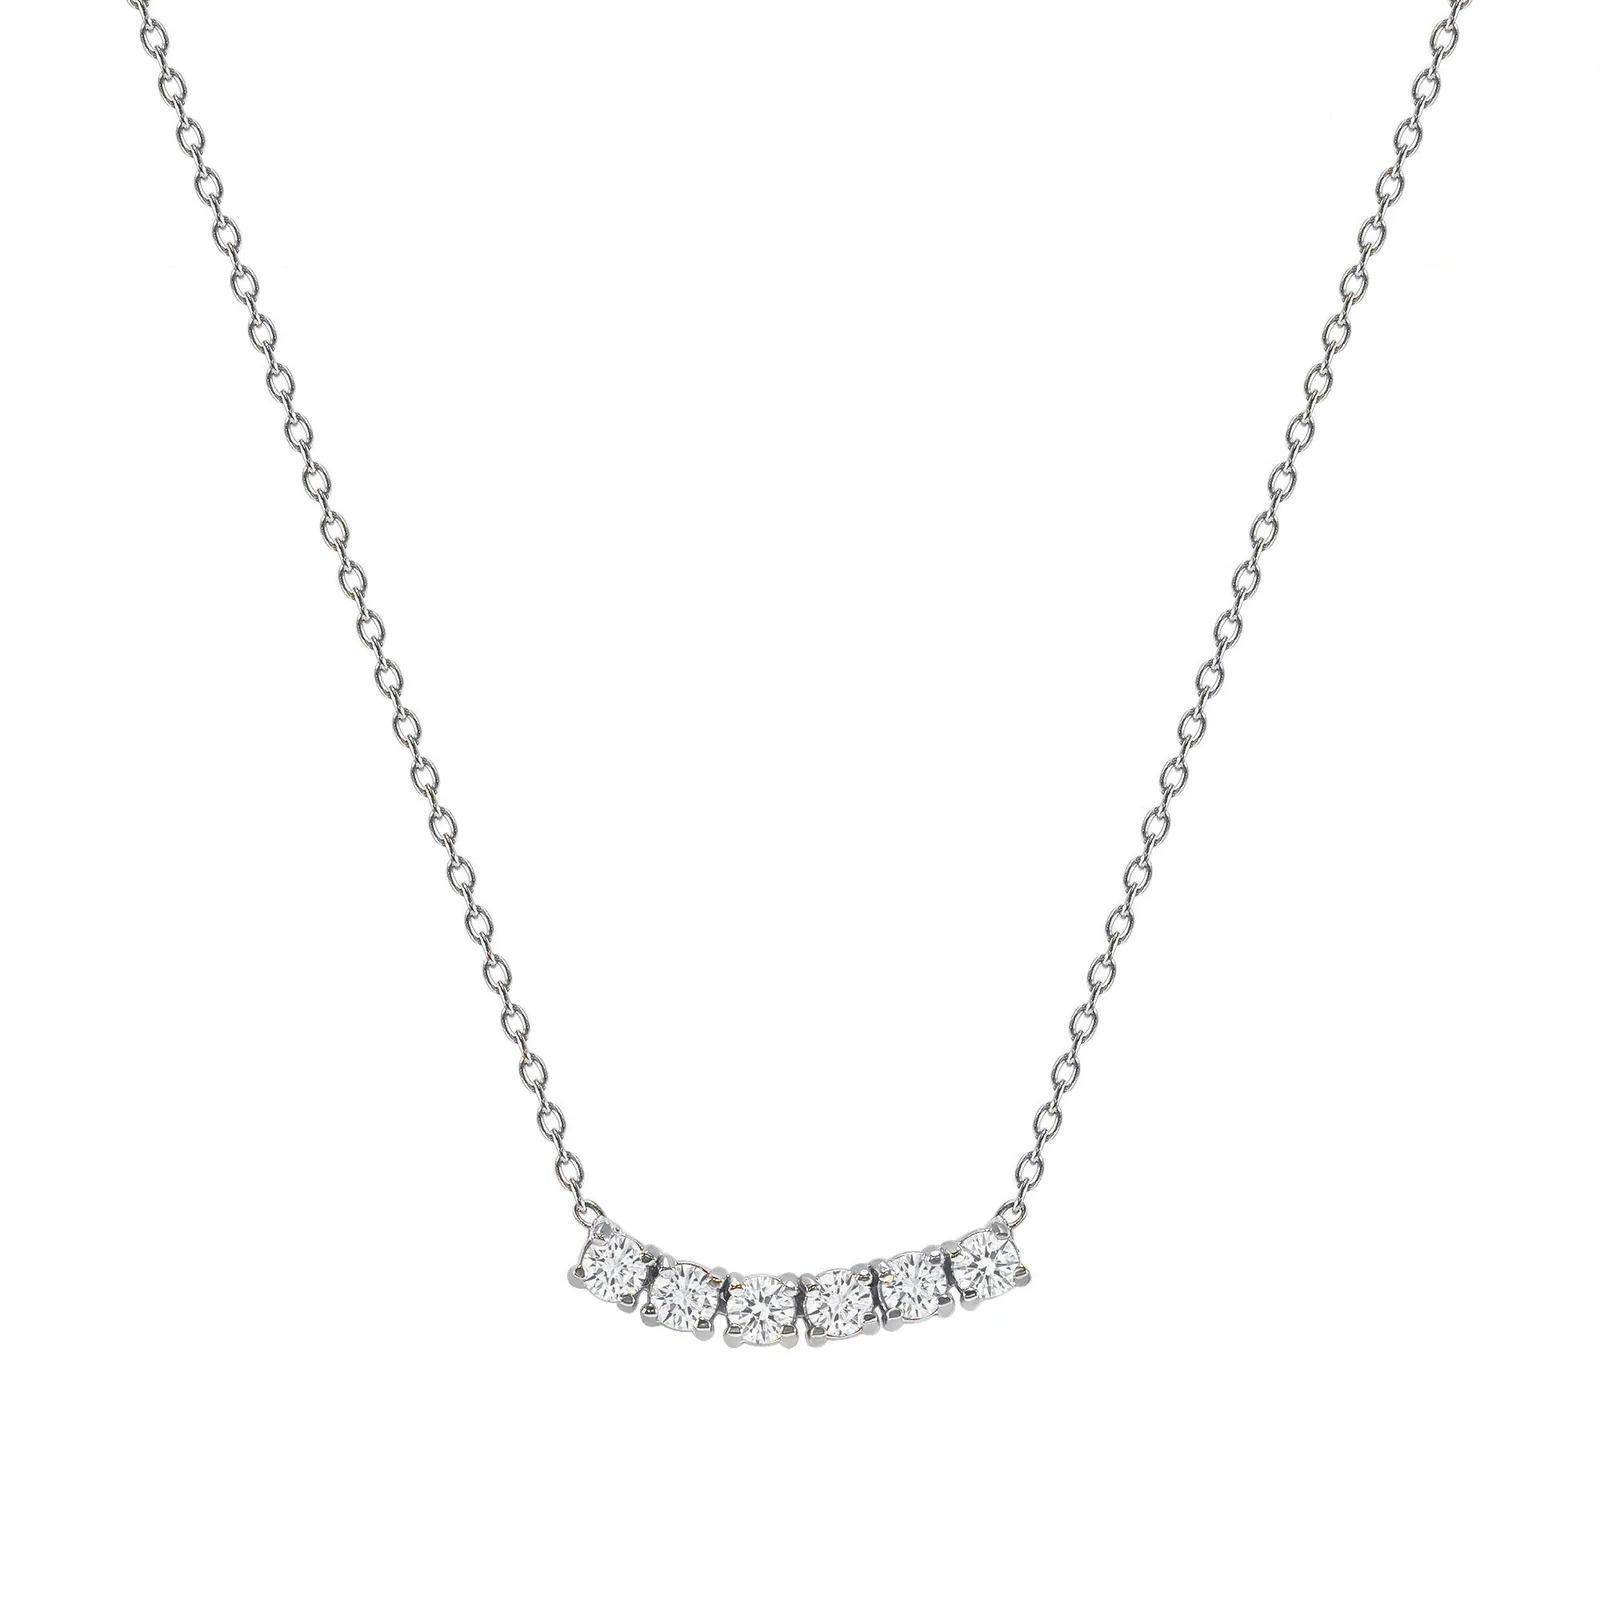 This petite, curved diamond necklace is crafted with gorgeous 14k gold set with six round diamonds.  

Gold: 14k 
Diamond Total Carats: 1ct
Diamond Cut: Round (6 diamonds)
Diamond Clarity: VS
Diamond Color: F
Color: White Gold
Necklace Length: 18